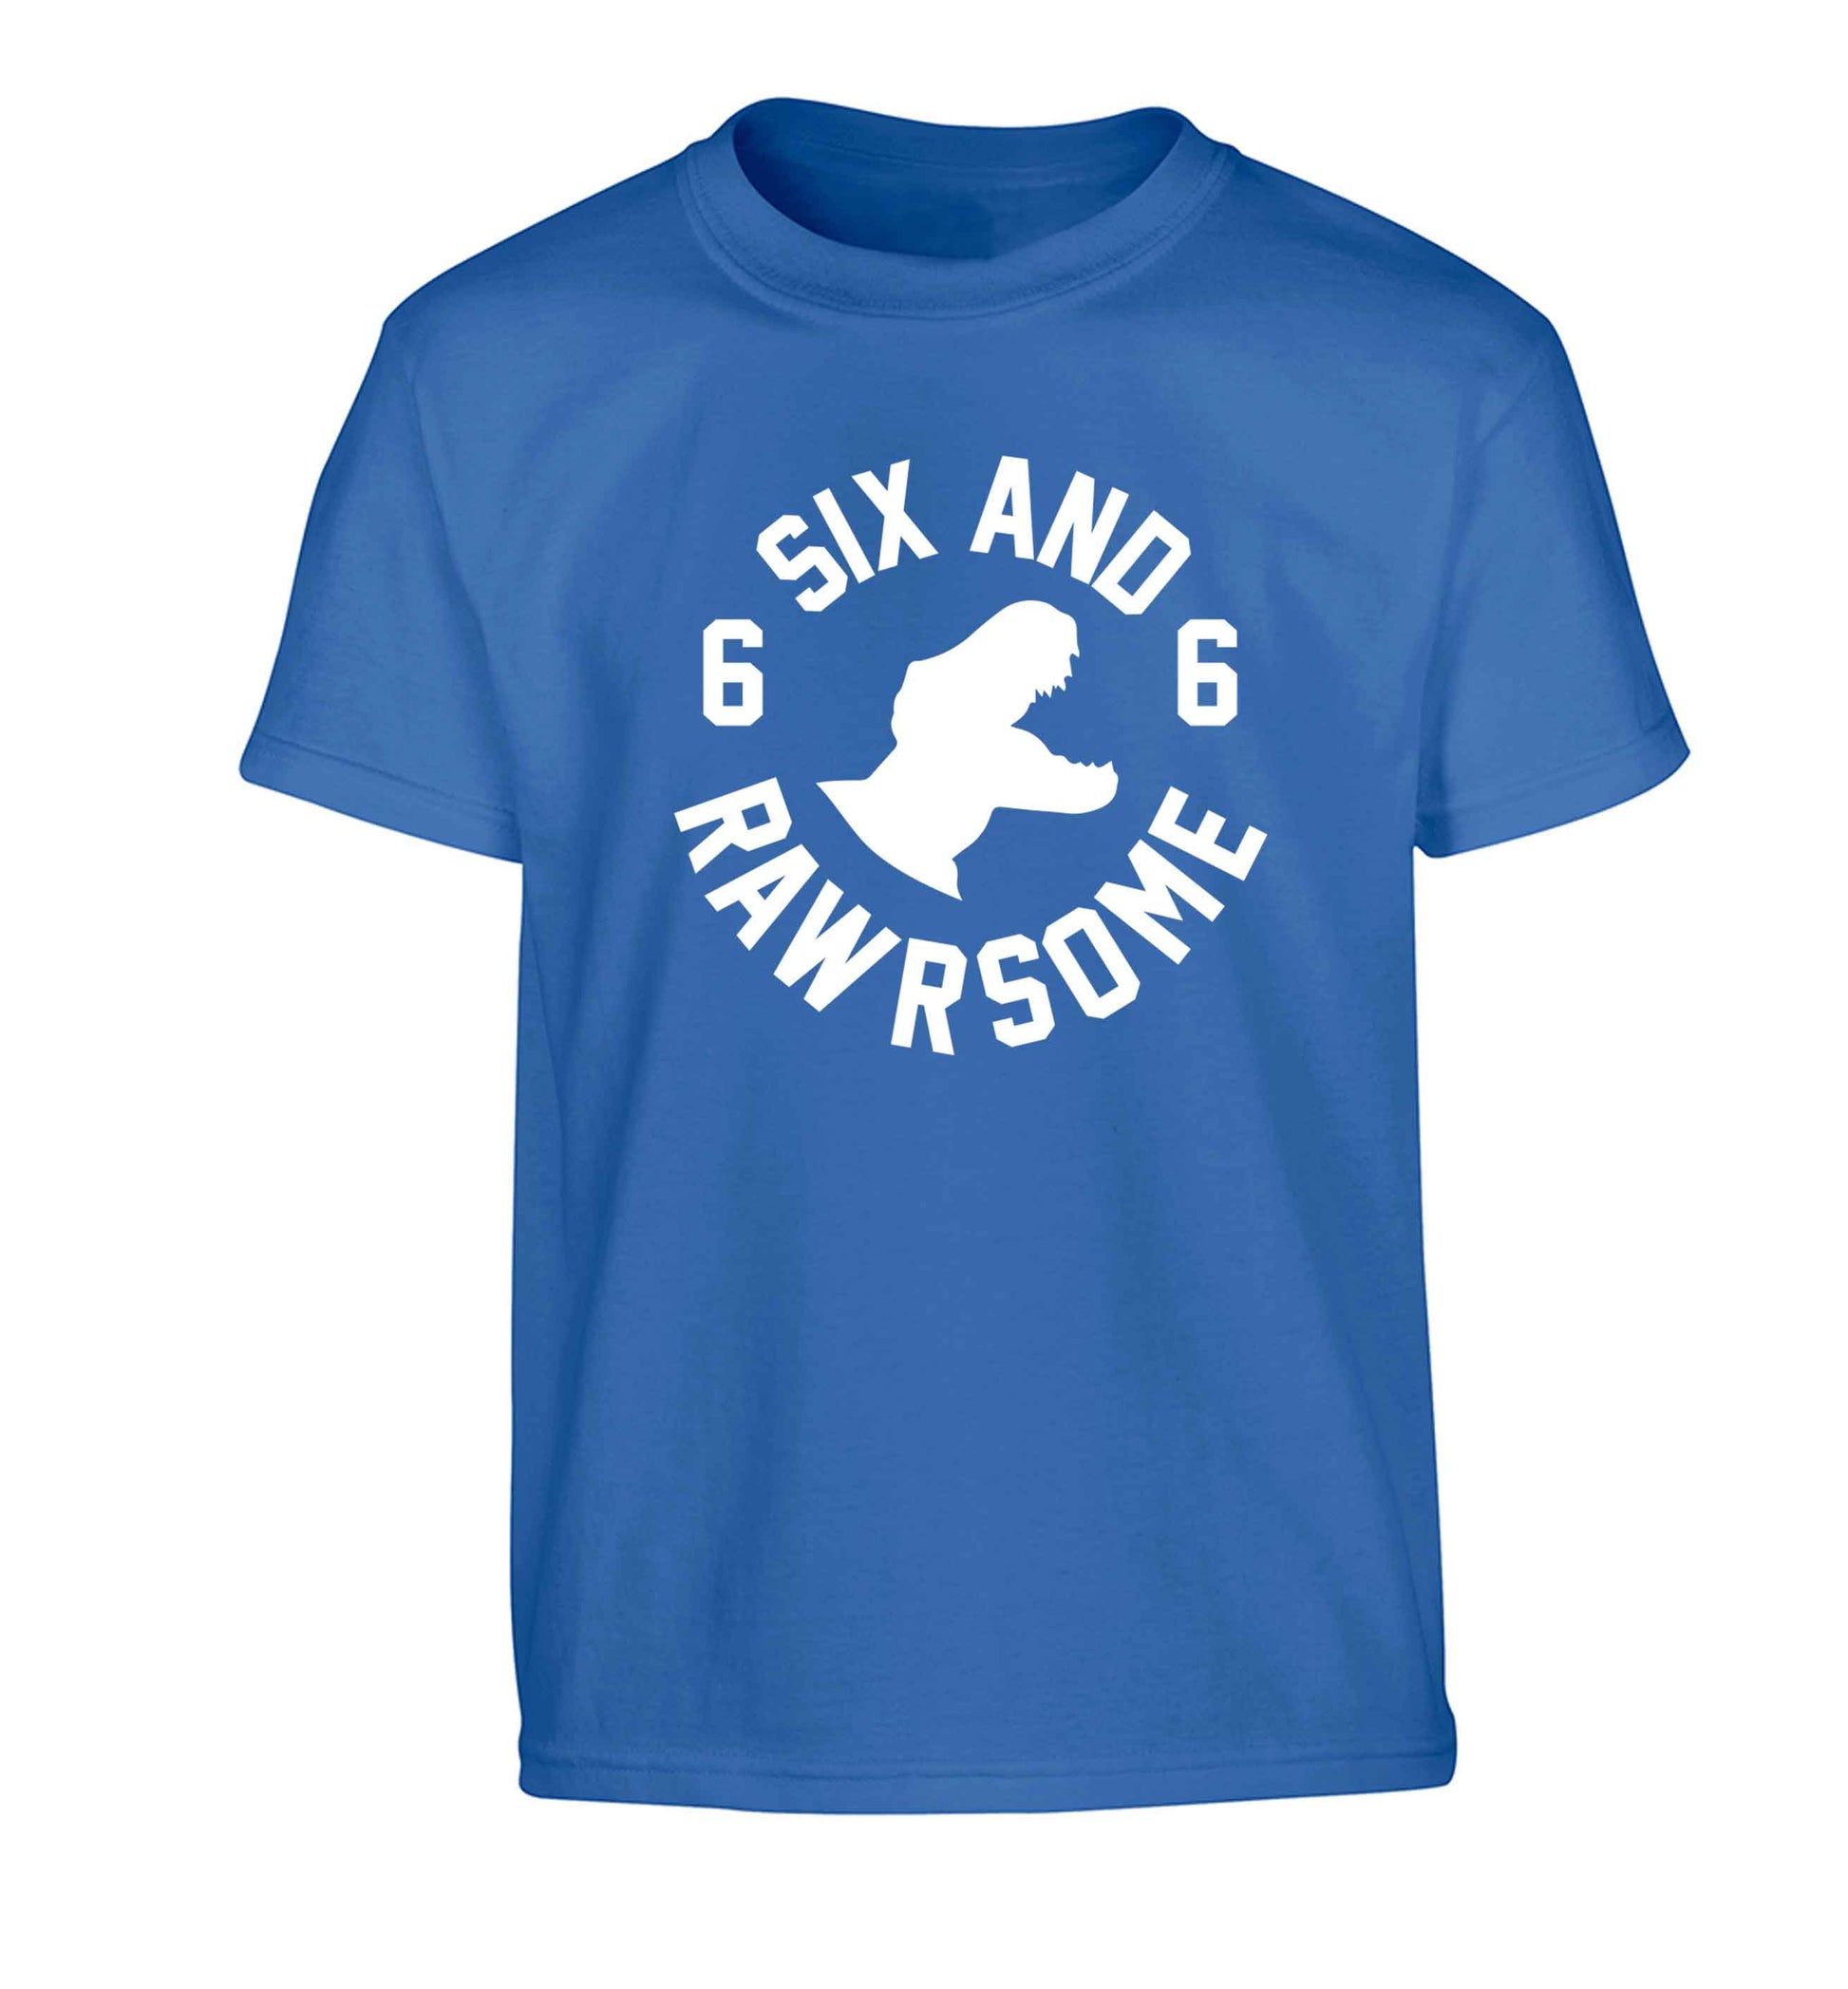 Six and rawrsome Children's blue Tshirt 12-13 Years